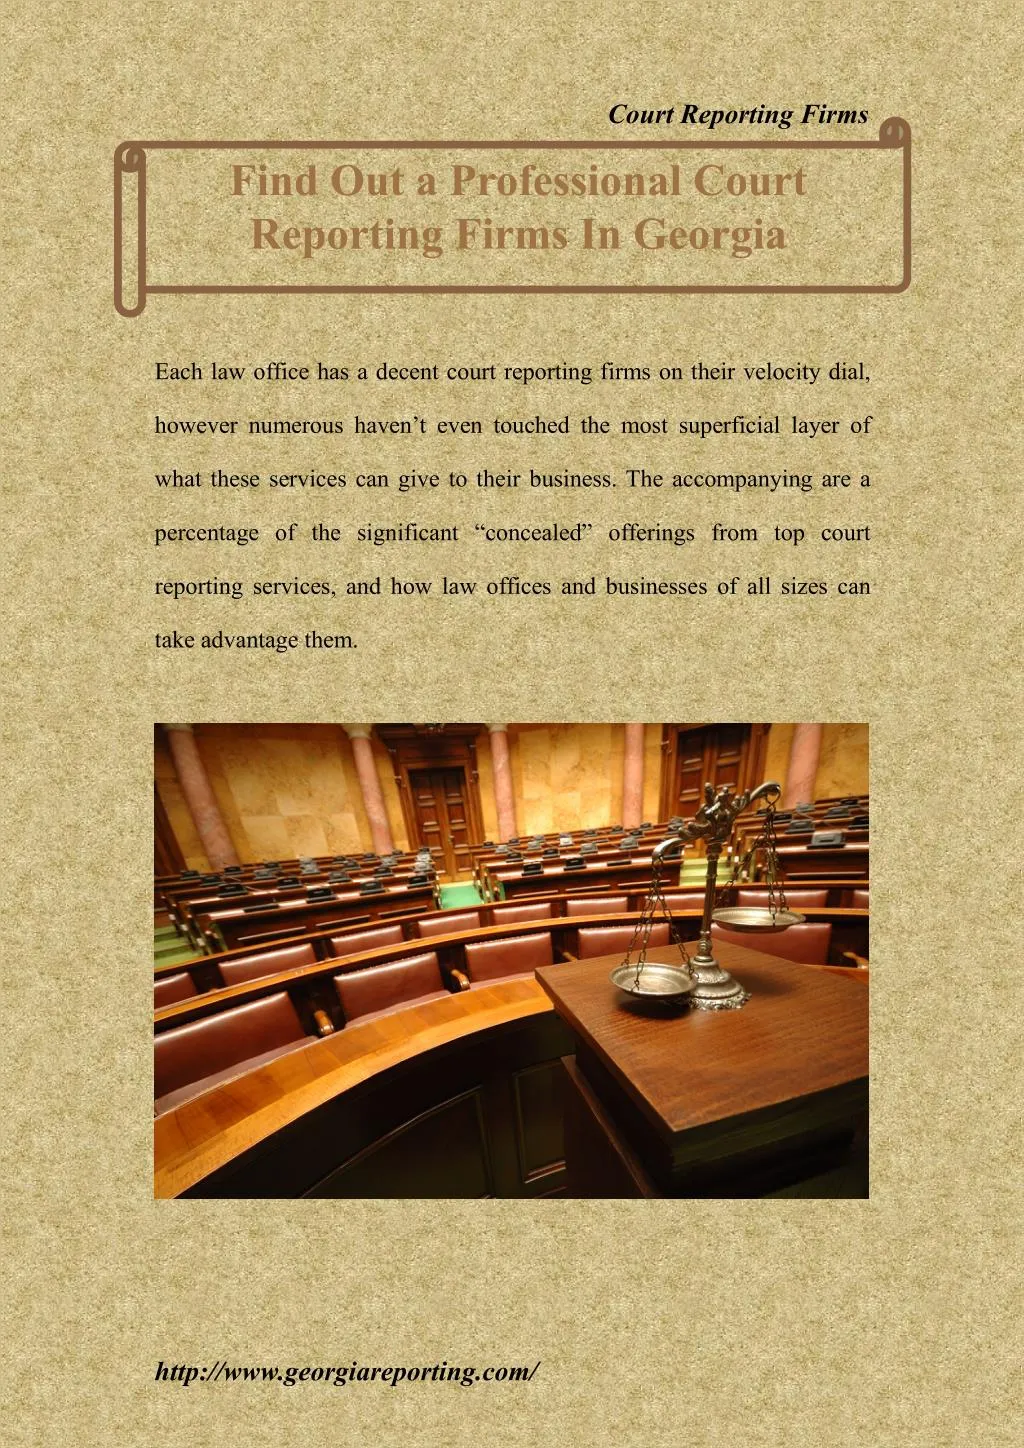 PPT Find Out a Professional Court Reporting Firms In Georgia